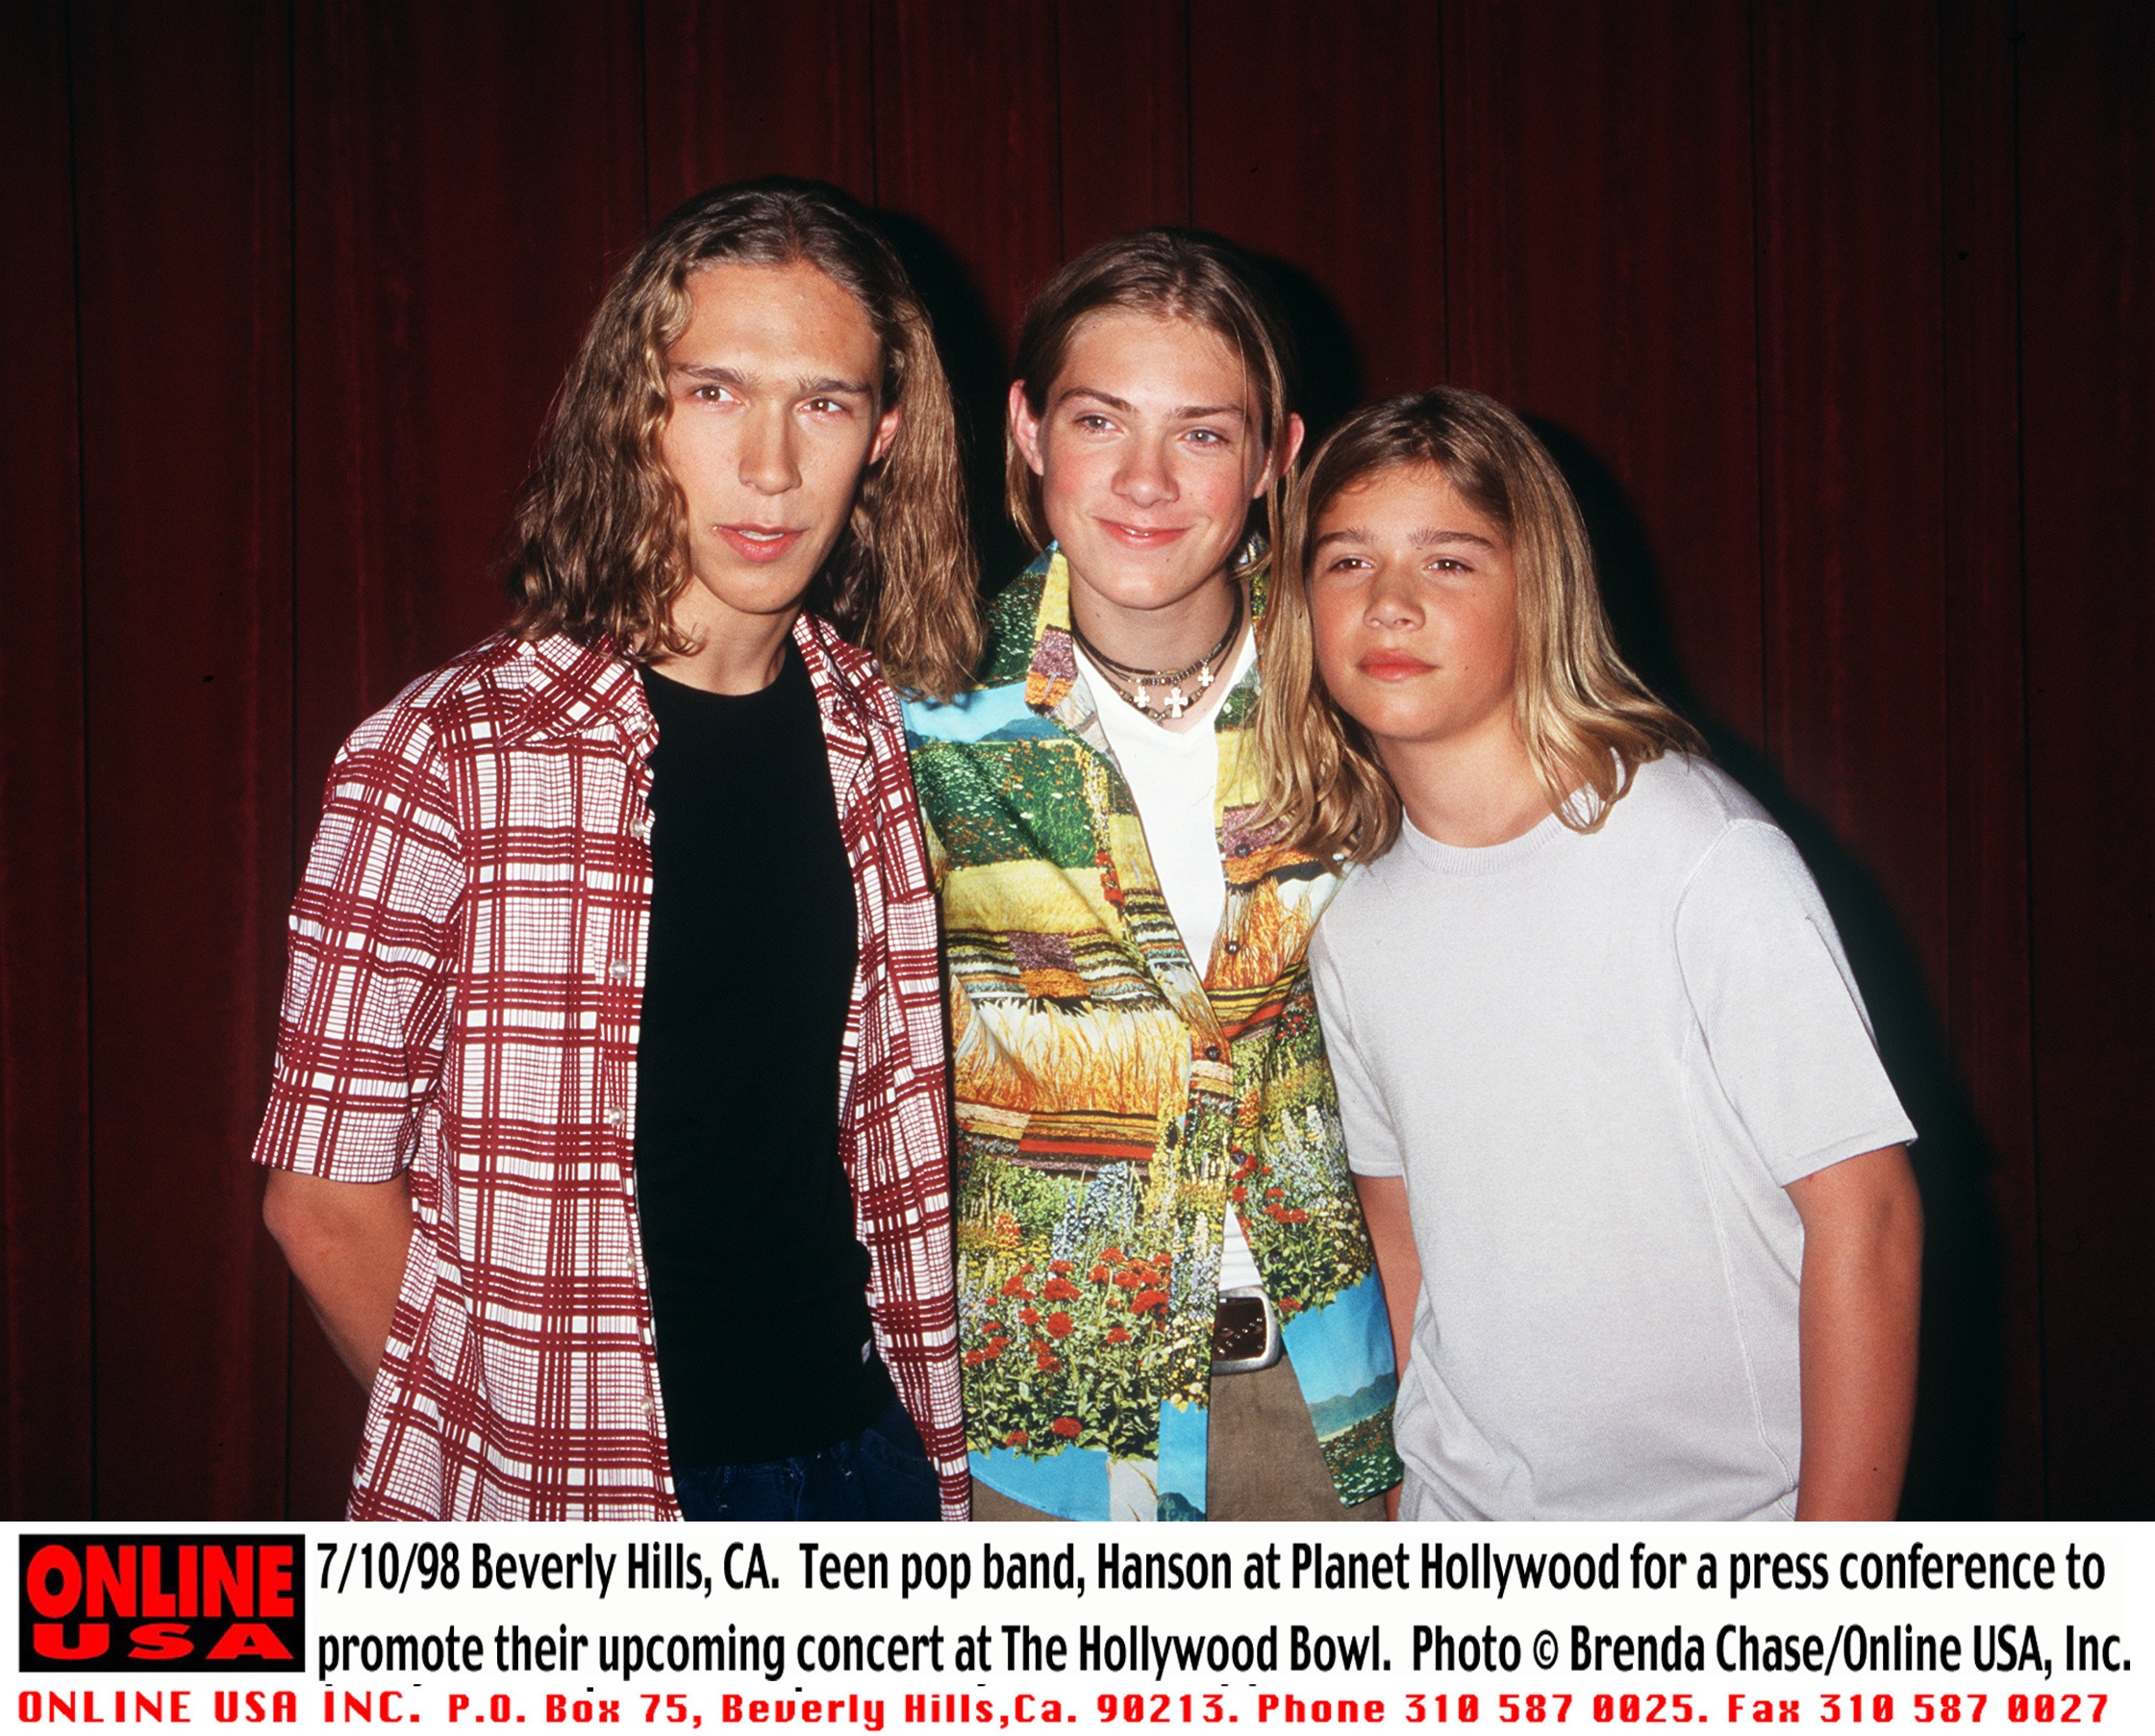 7/10/98 Beverly Hills, CA. Teen pop band, Hanson at Planet Hollywood for a press conference to promo